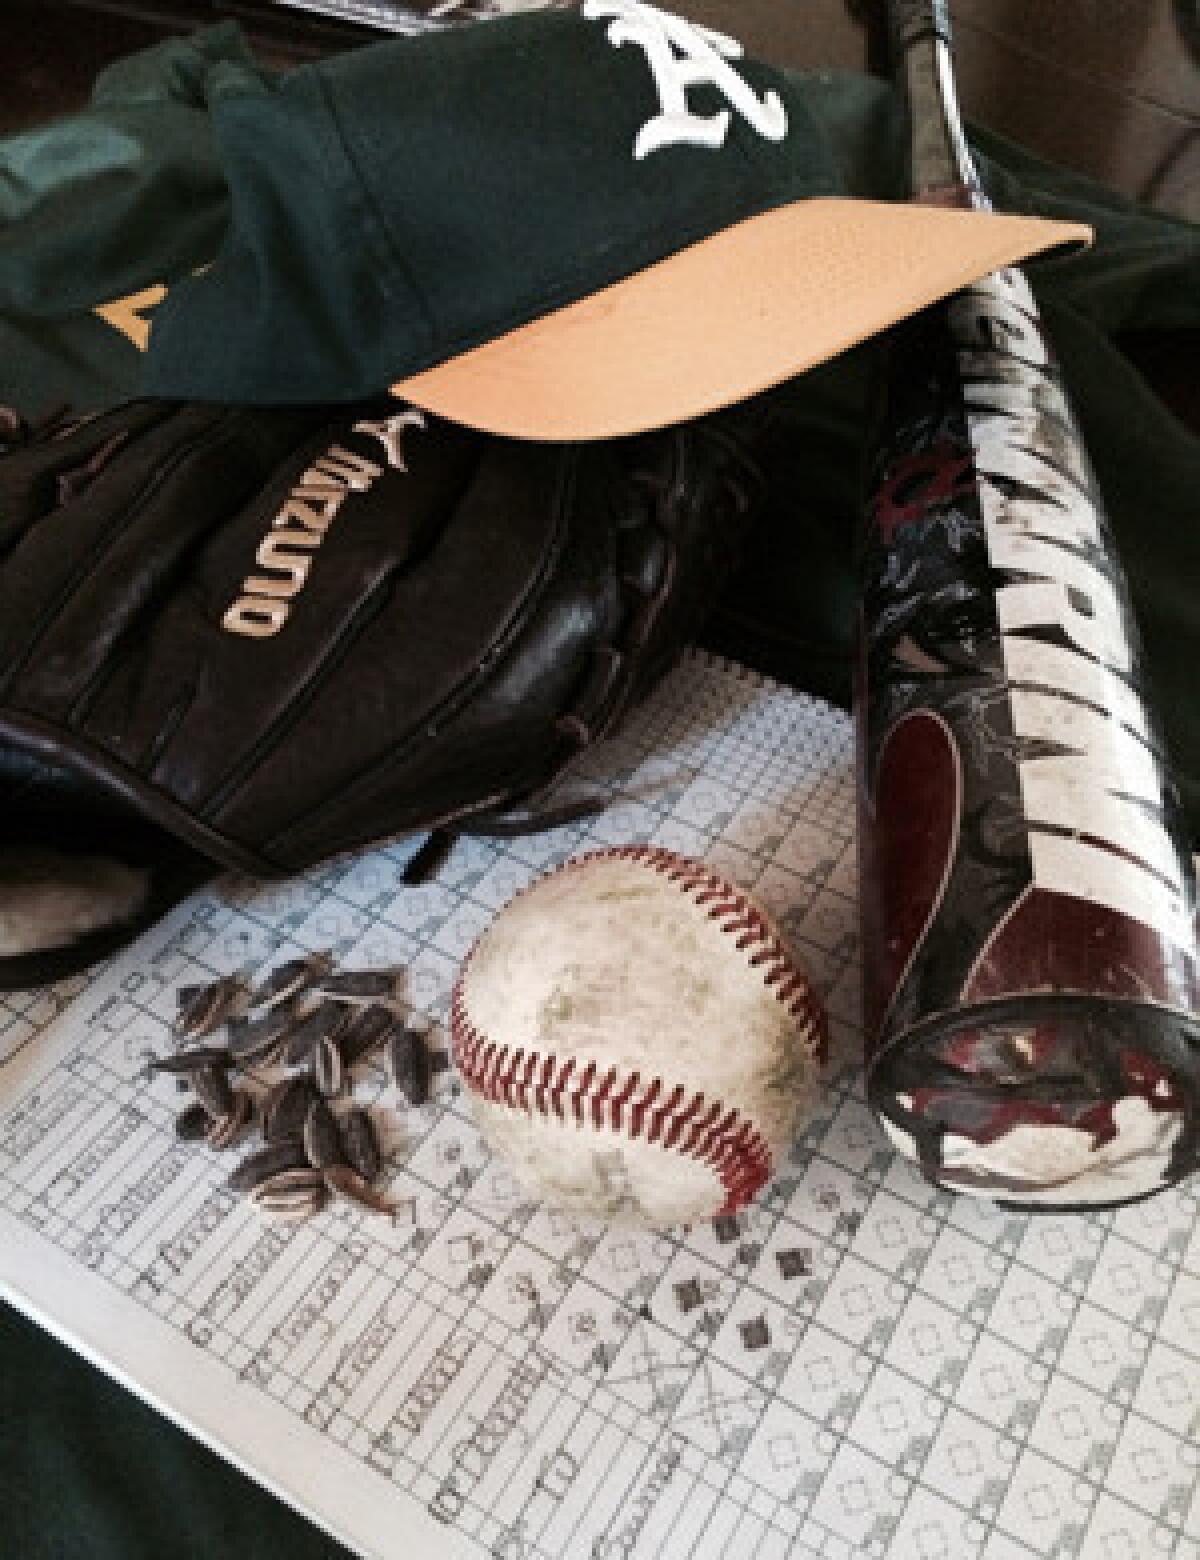 When it comes to being a youth baseball coach, it's essential to have the right tools: sunflower seeds, glove, scorebook and a bat costing more than some TVs.